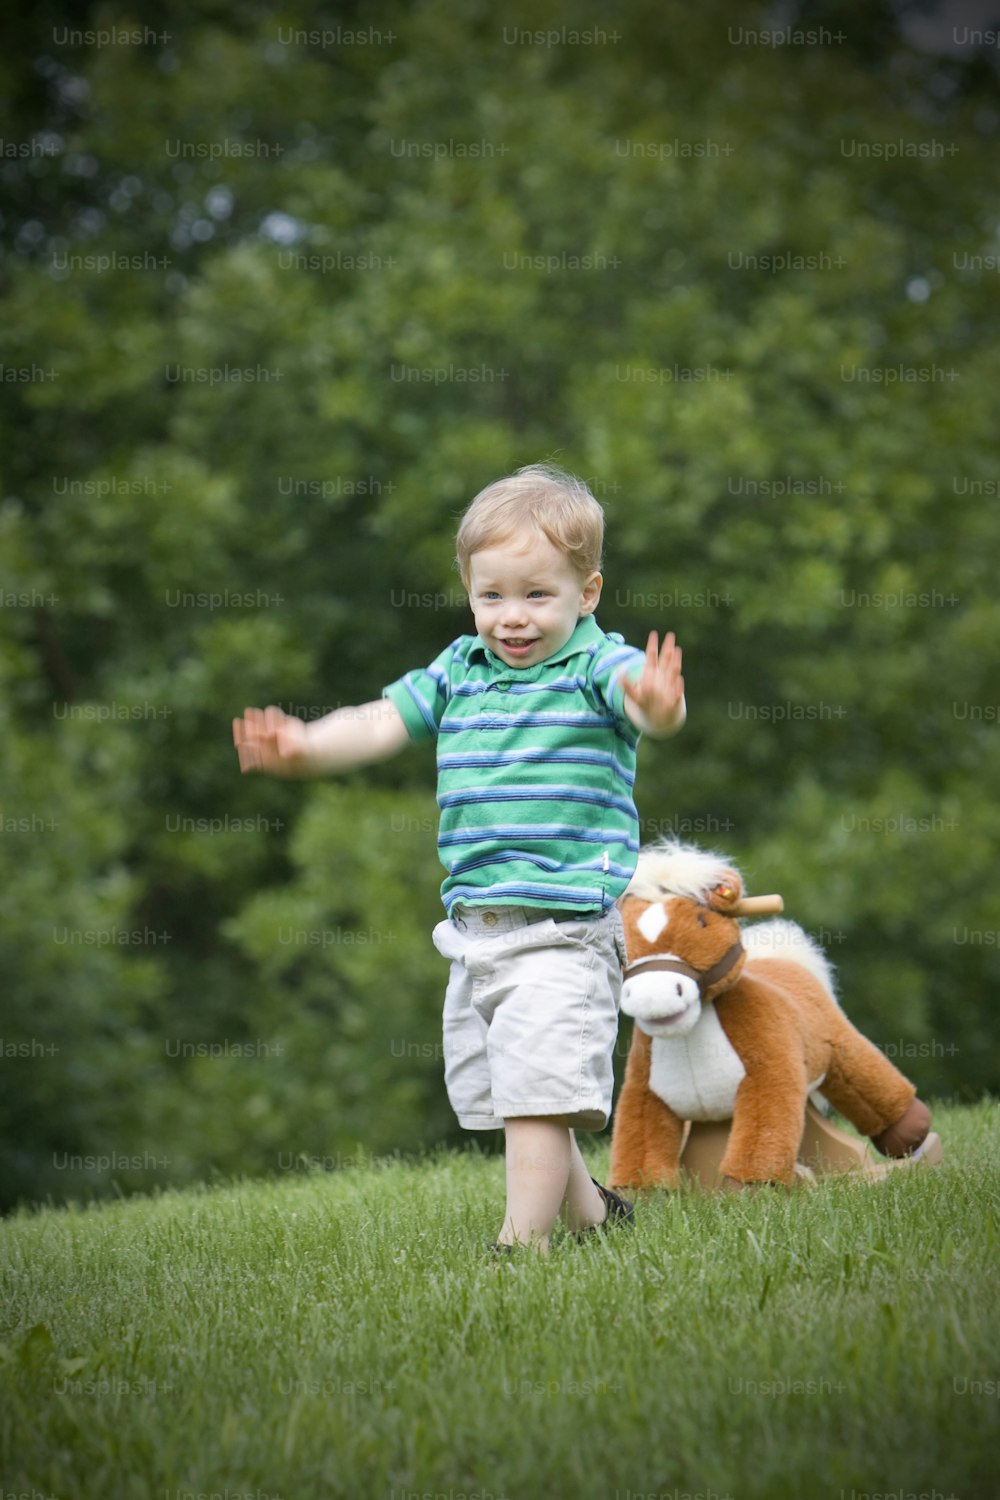 a little boy that is standing in the grass with a stuffed animal